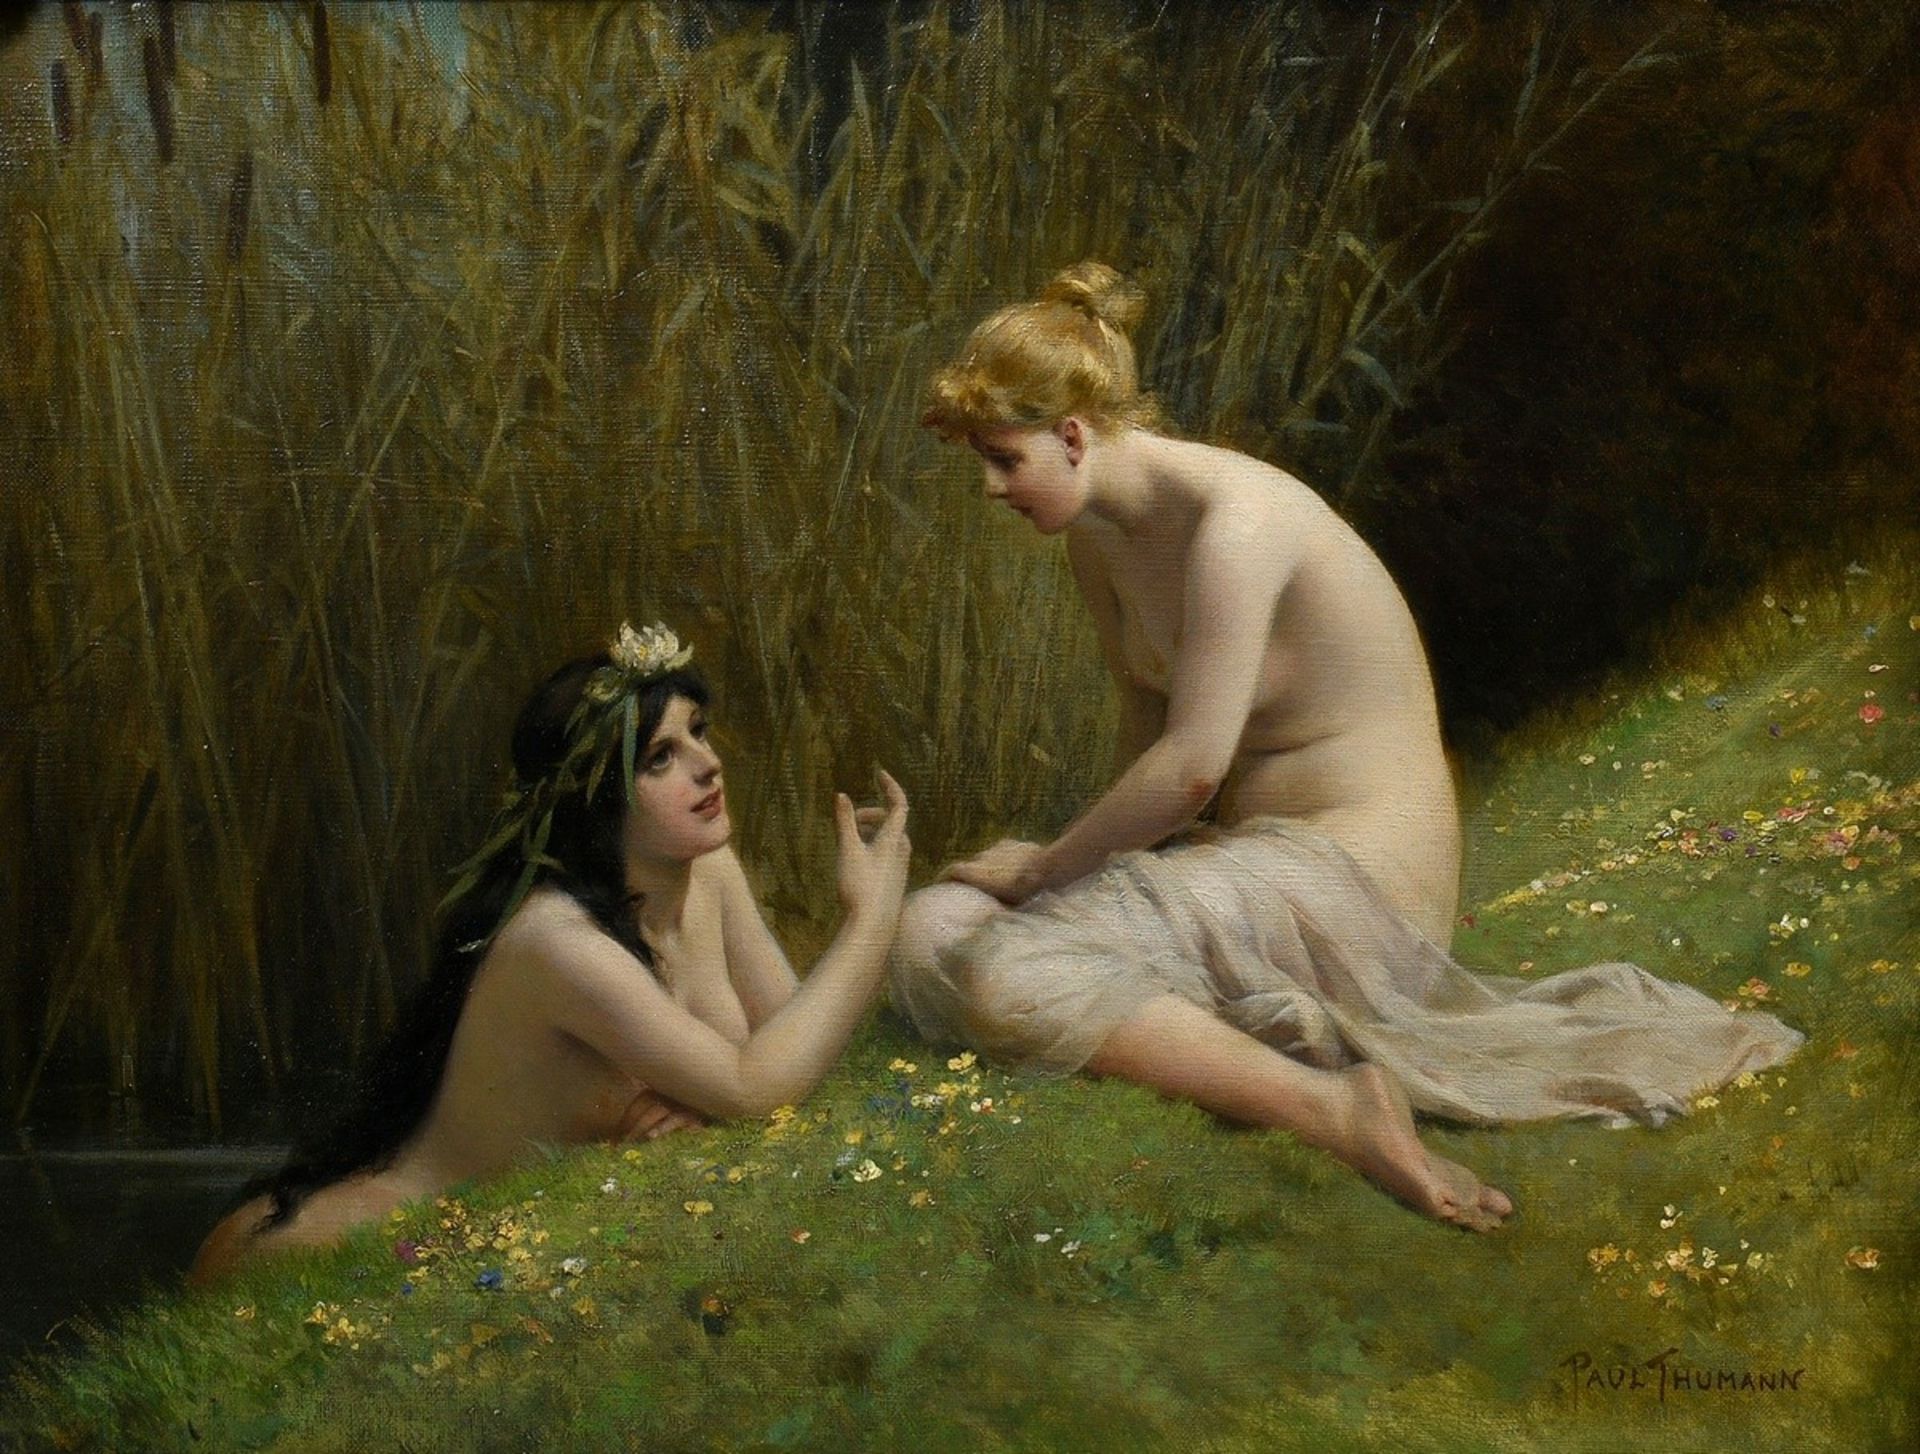 Thumann, Paul (1834-1908) "Water Nymph and Elf in Conversation" c. 1870, oil/canvas, l.r. sign., in - Image 2 of 12